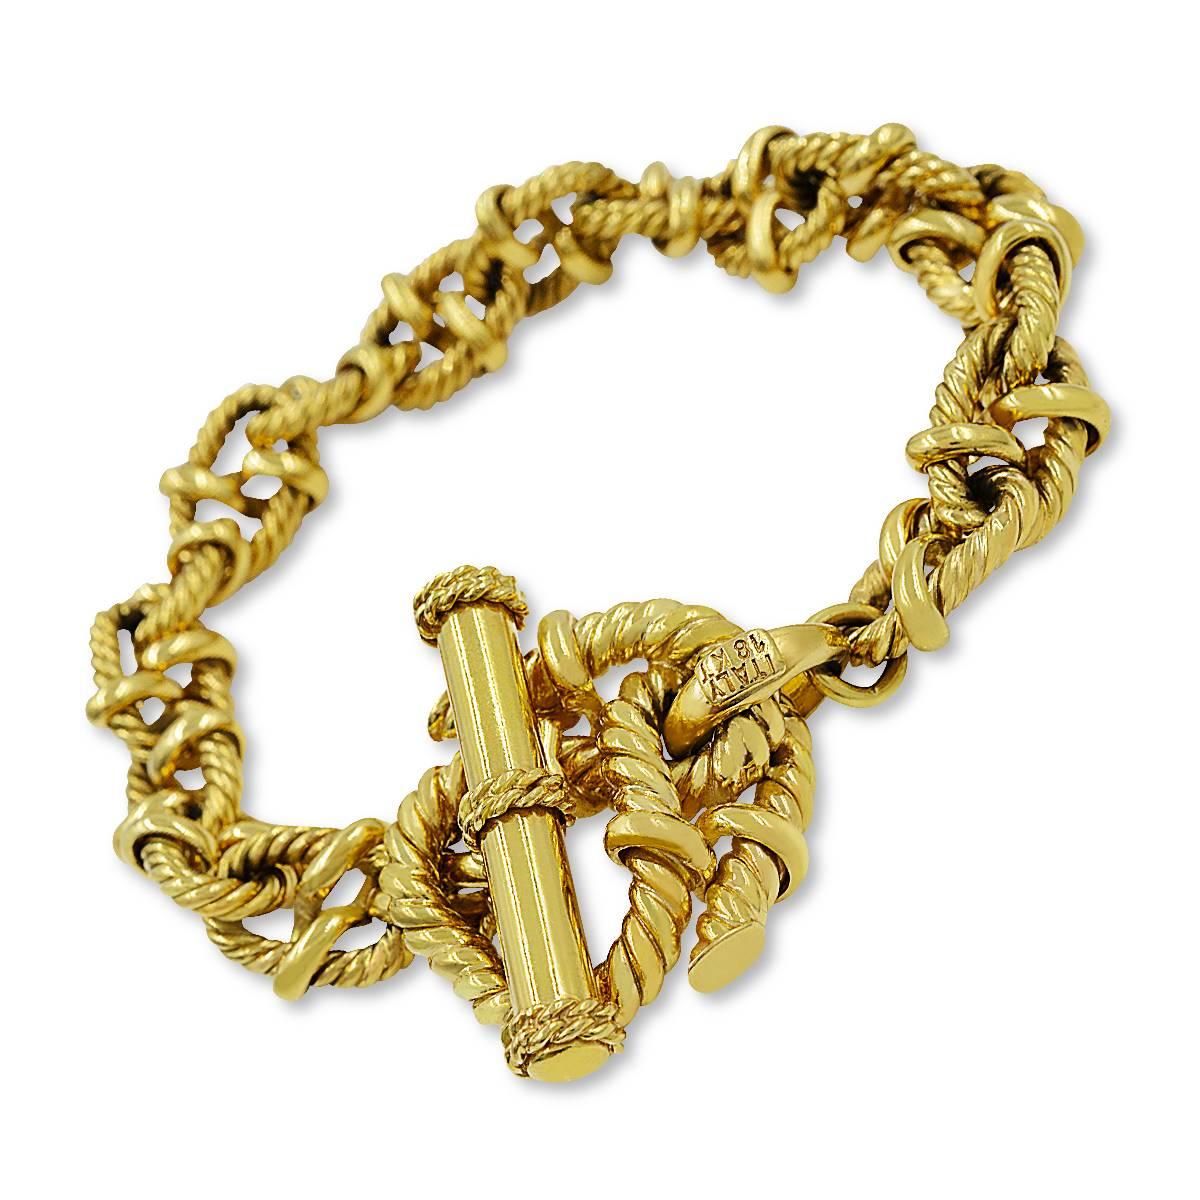 Gold knotted rope bracelet circa 1980. Designed as a bright 18-karat yellow gold rope tied in a series of open knots, this is a chunky-gold-bracelet-lover's dream come true. Definitely makes a statement with its colossal size and unique design. It